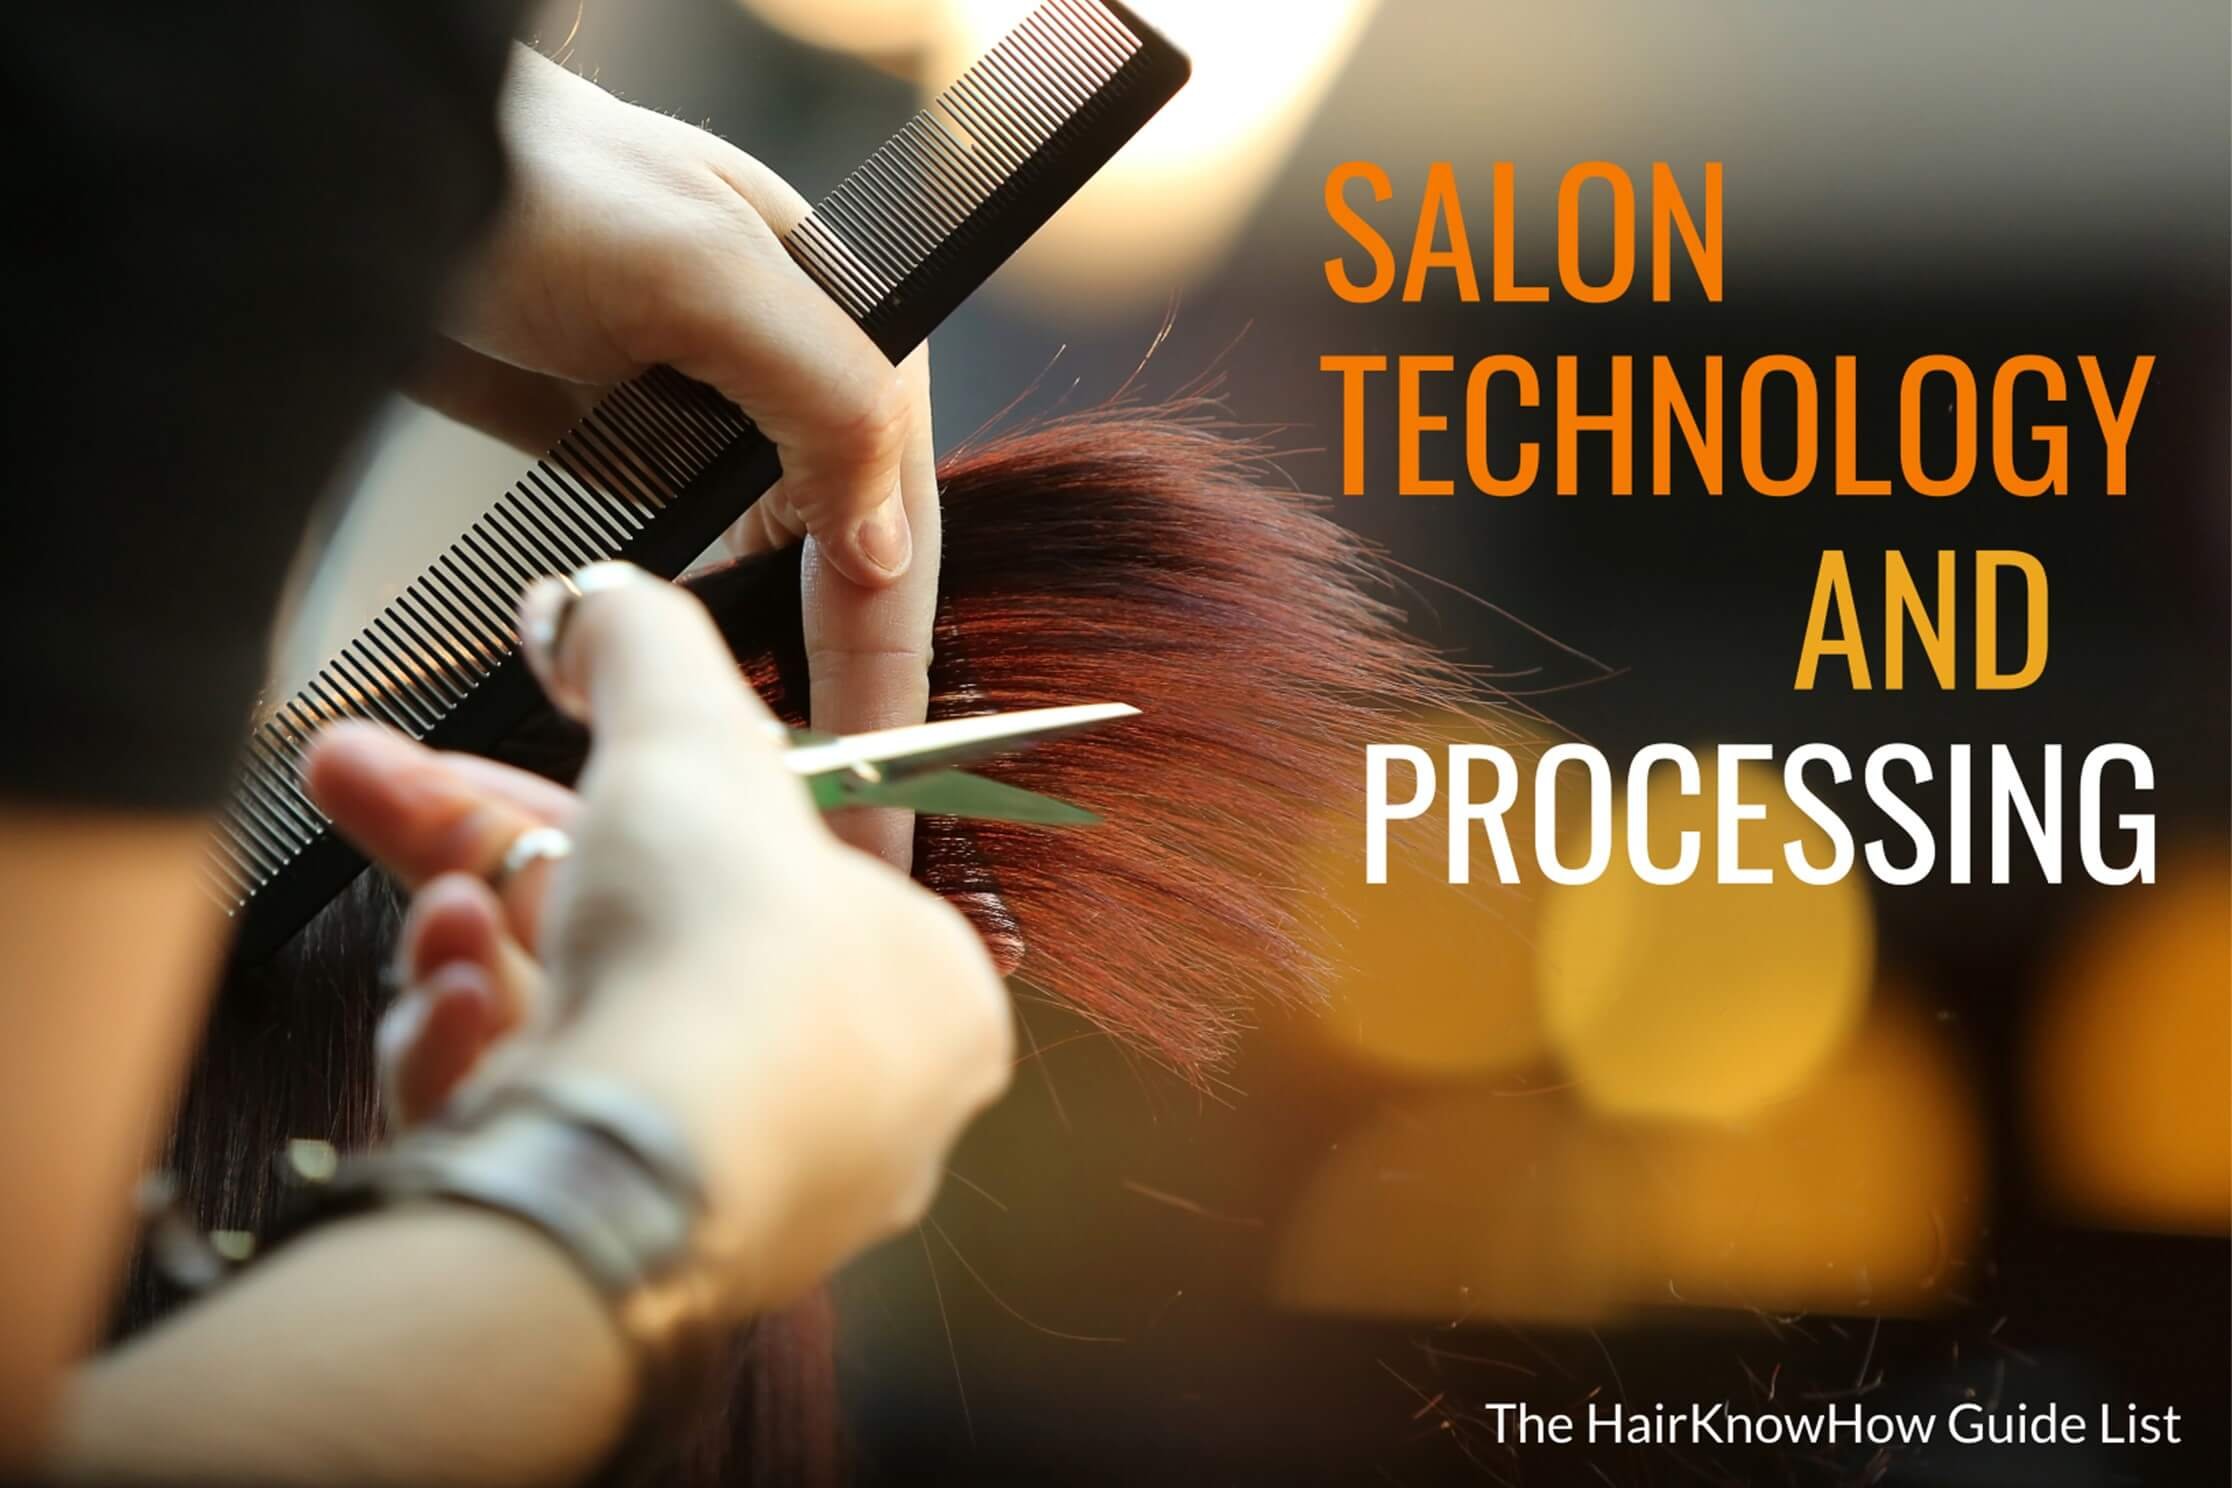 Salon Technology and Processing